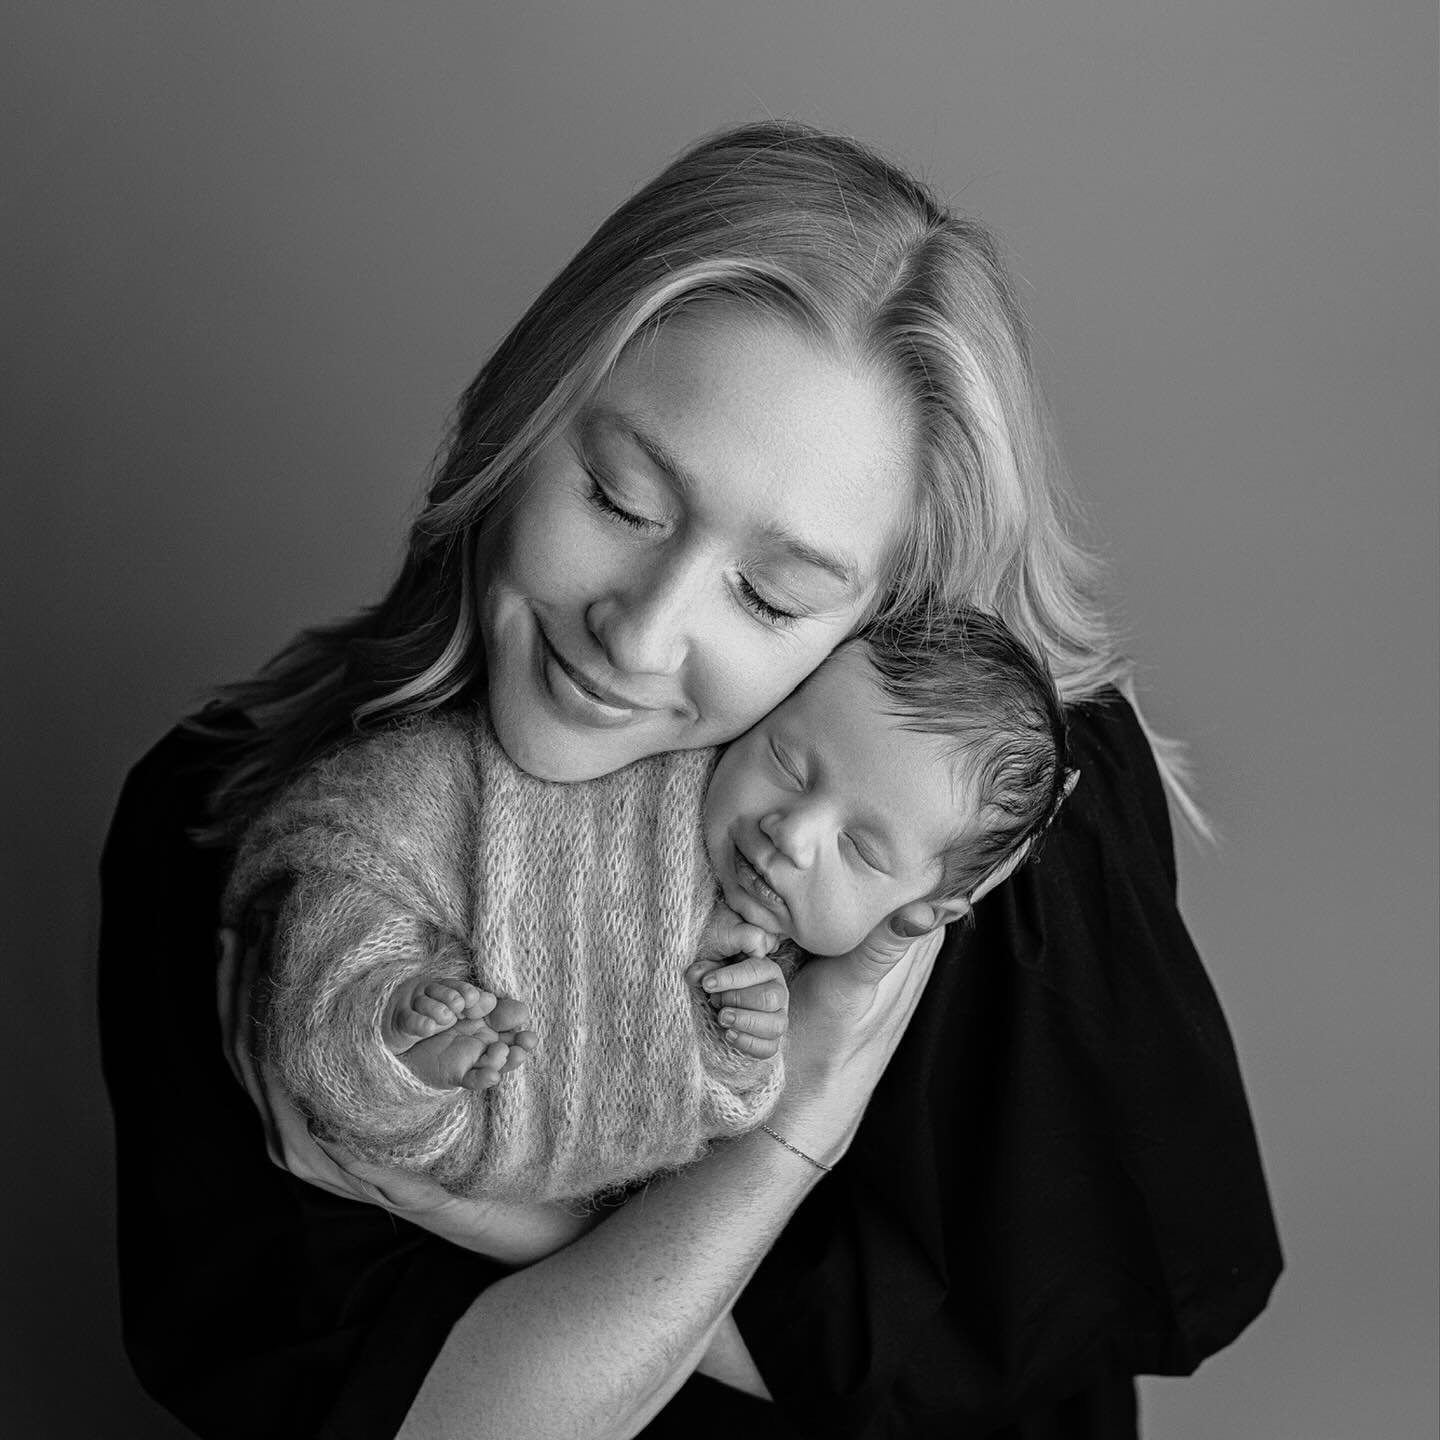 I absolutely adore family portraits with their newborn like these. SO. MUCH. LOVE.